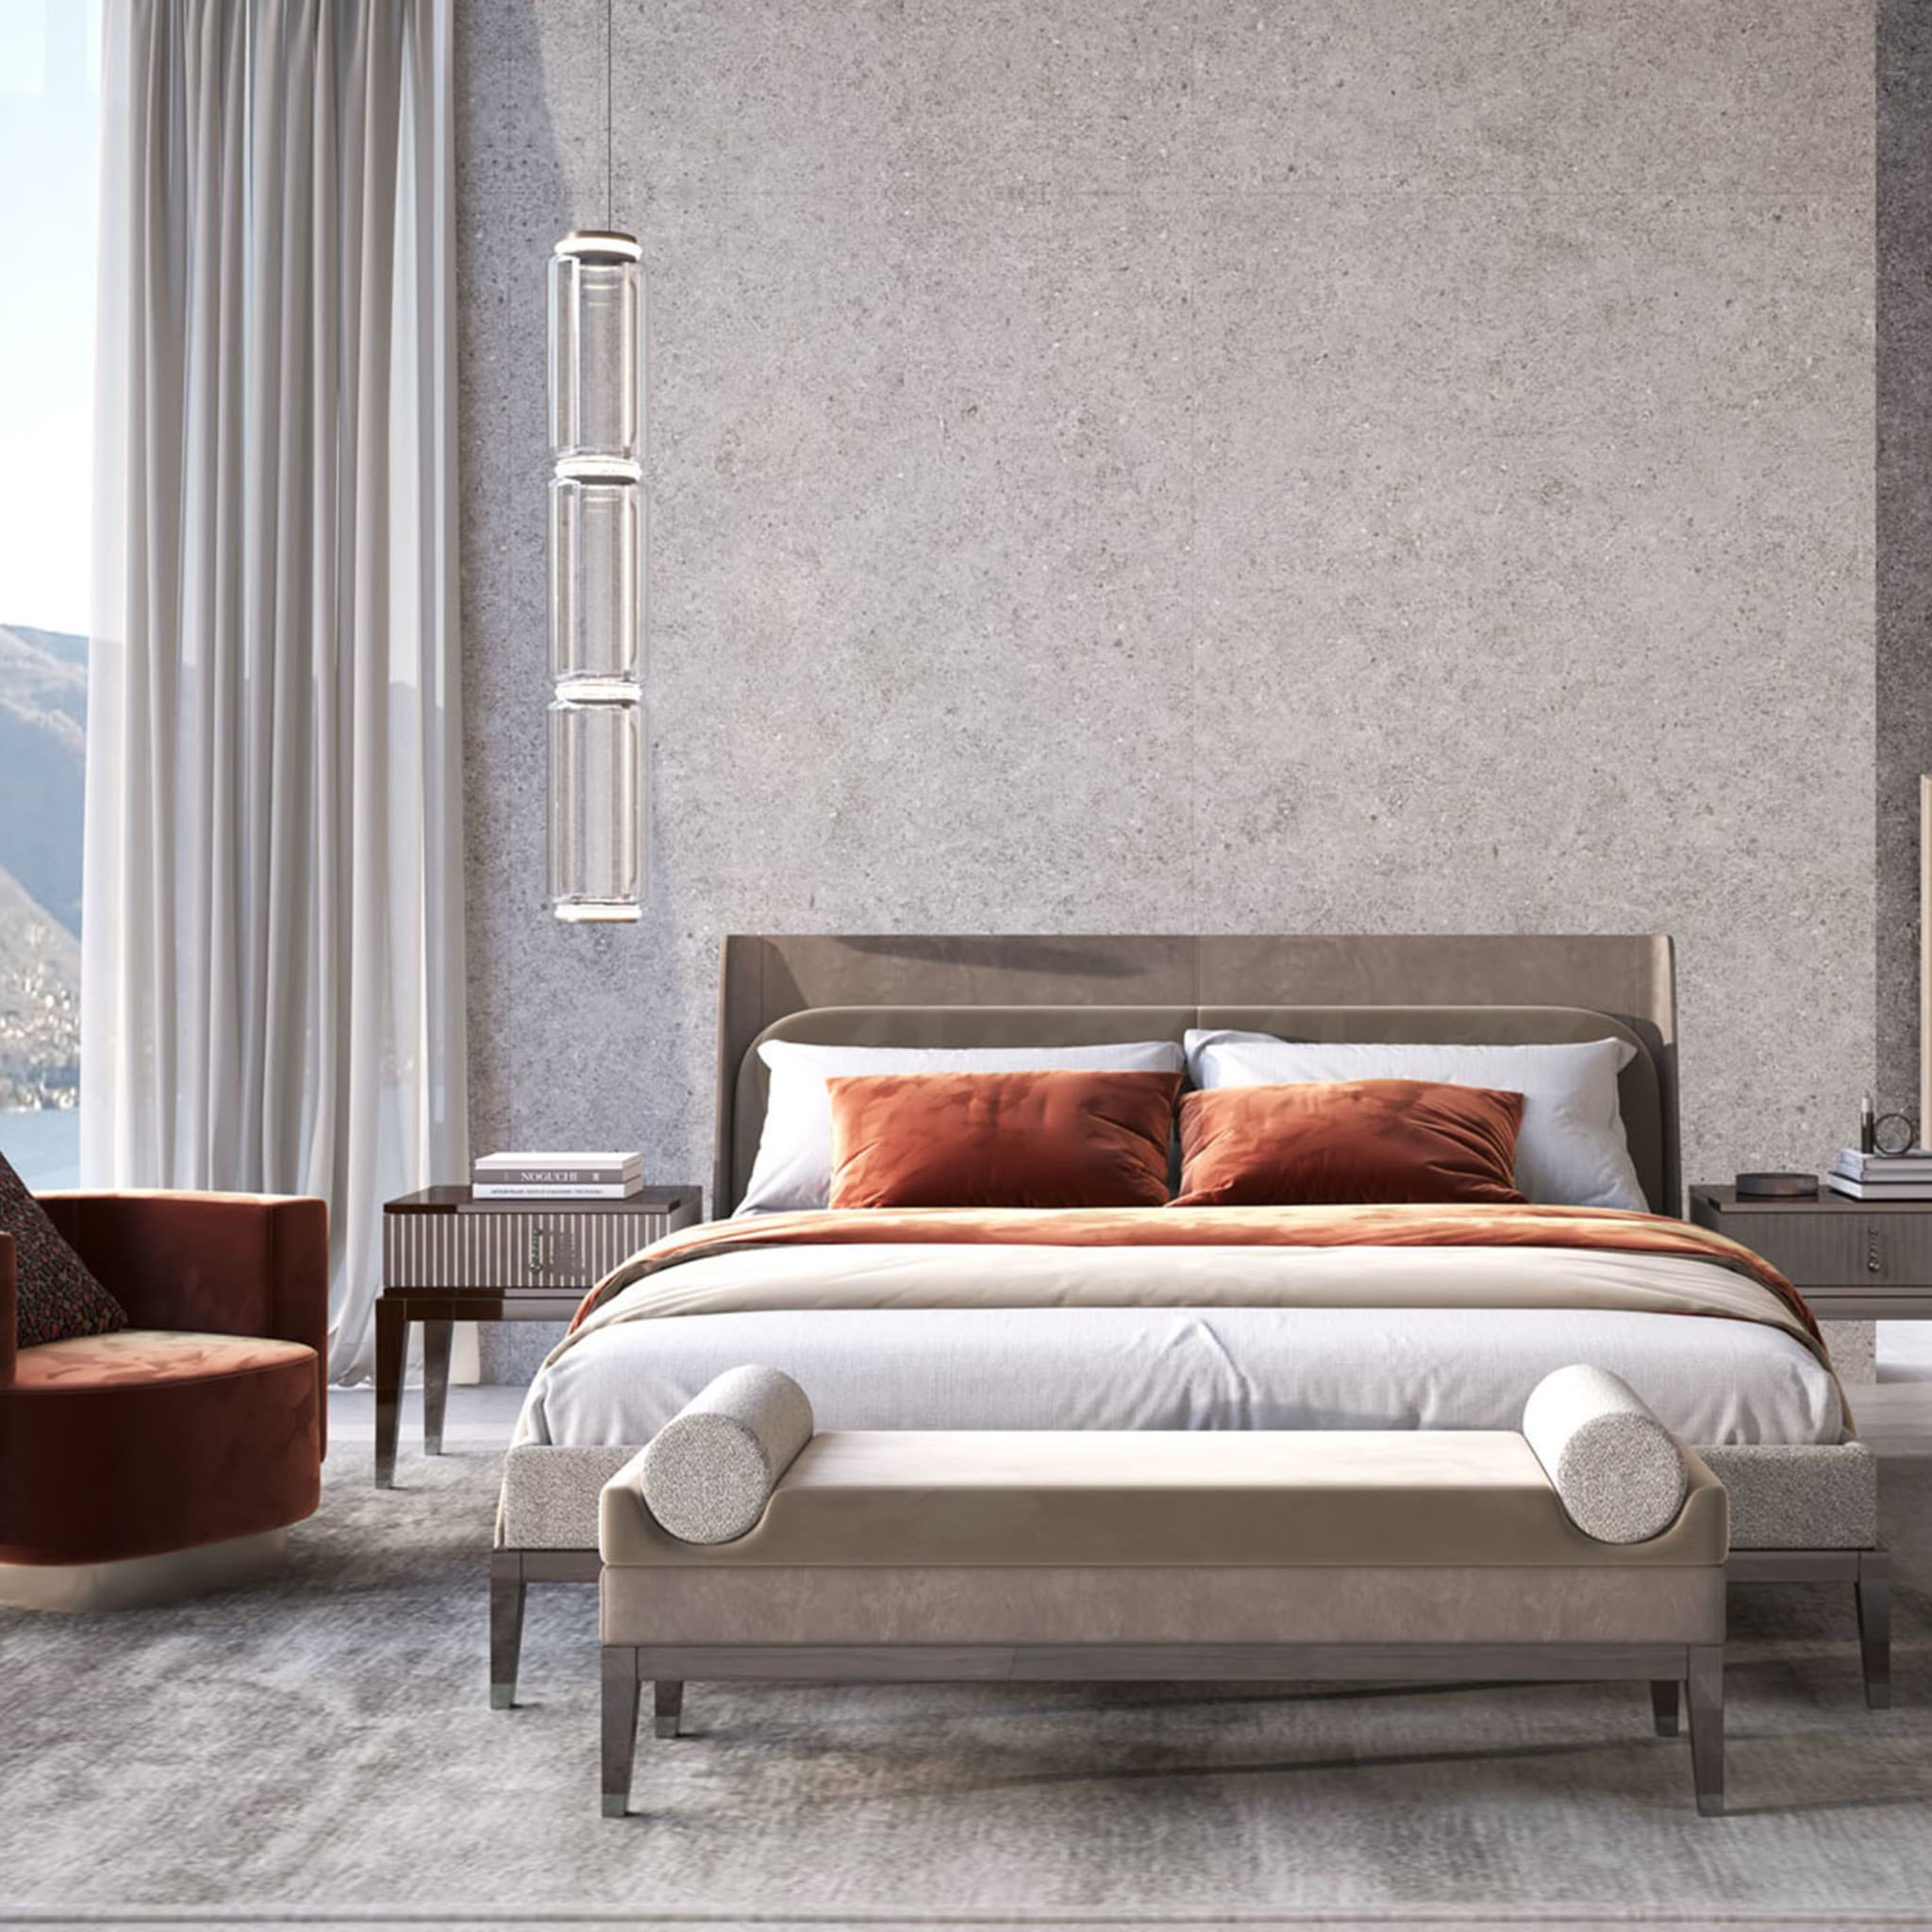 Italian Bed Upholstered in Nubuck and Quinoa Boucle Fabric  - Alternative view 2